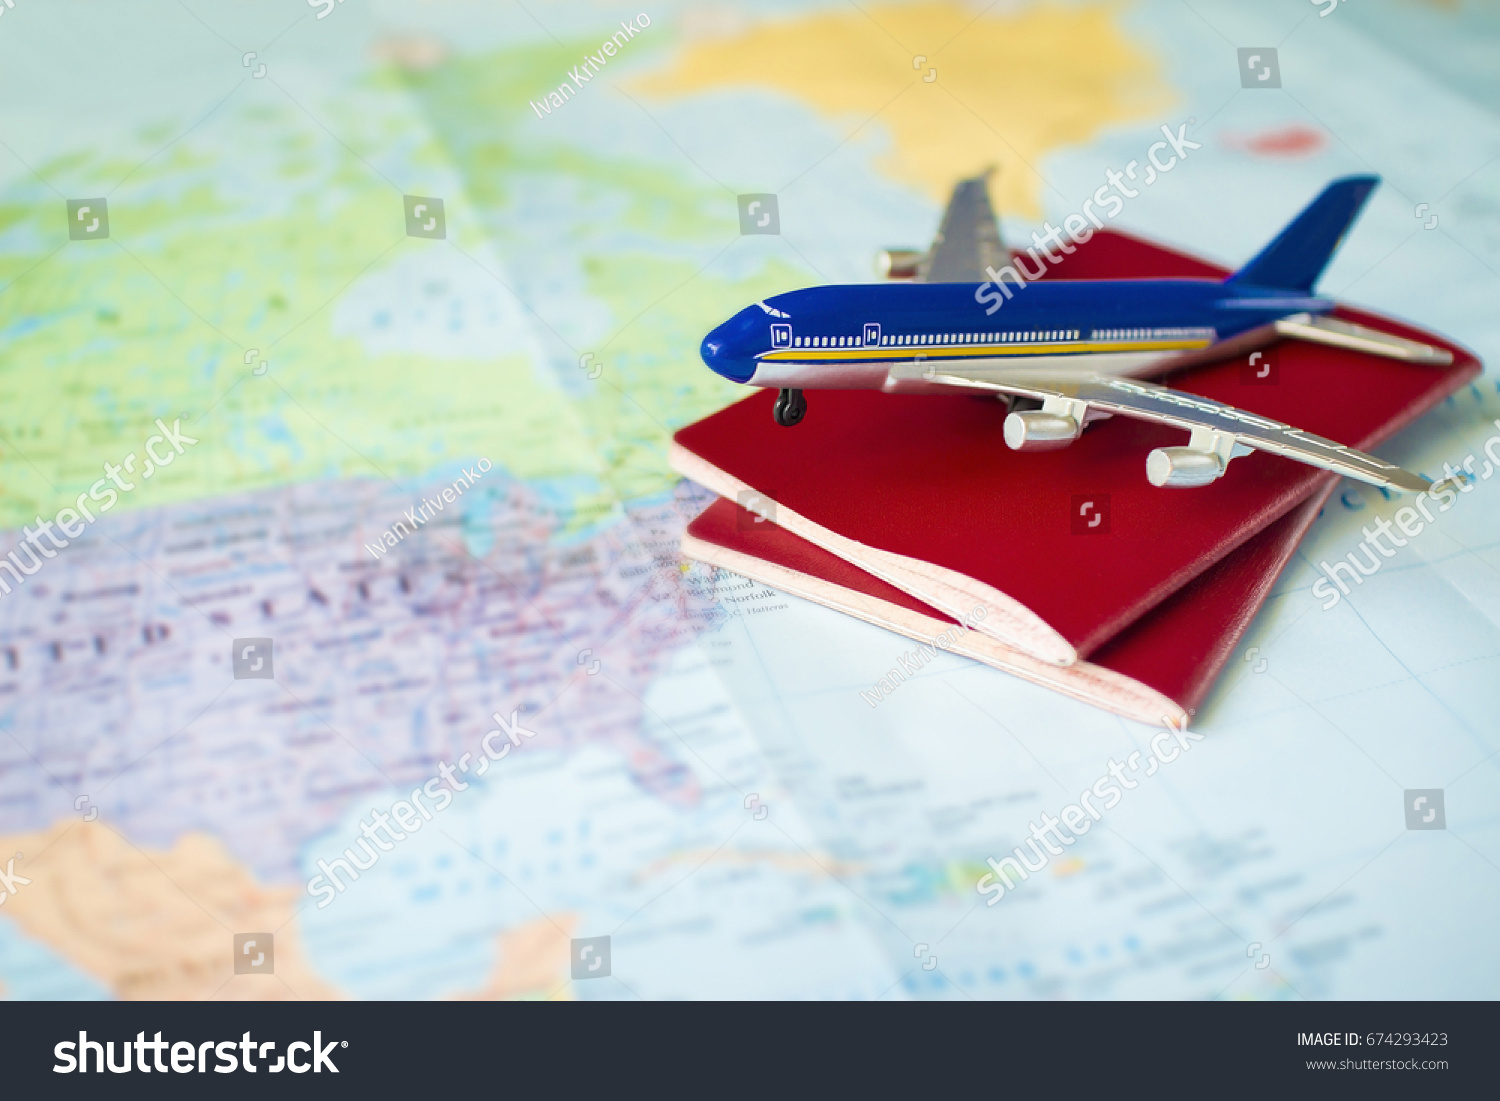 toy aircraft with two neutral passports on the map, travel concept, flight to america, trip by plane. pasport and plane on world map #674293423